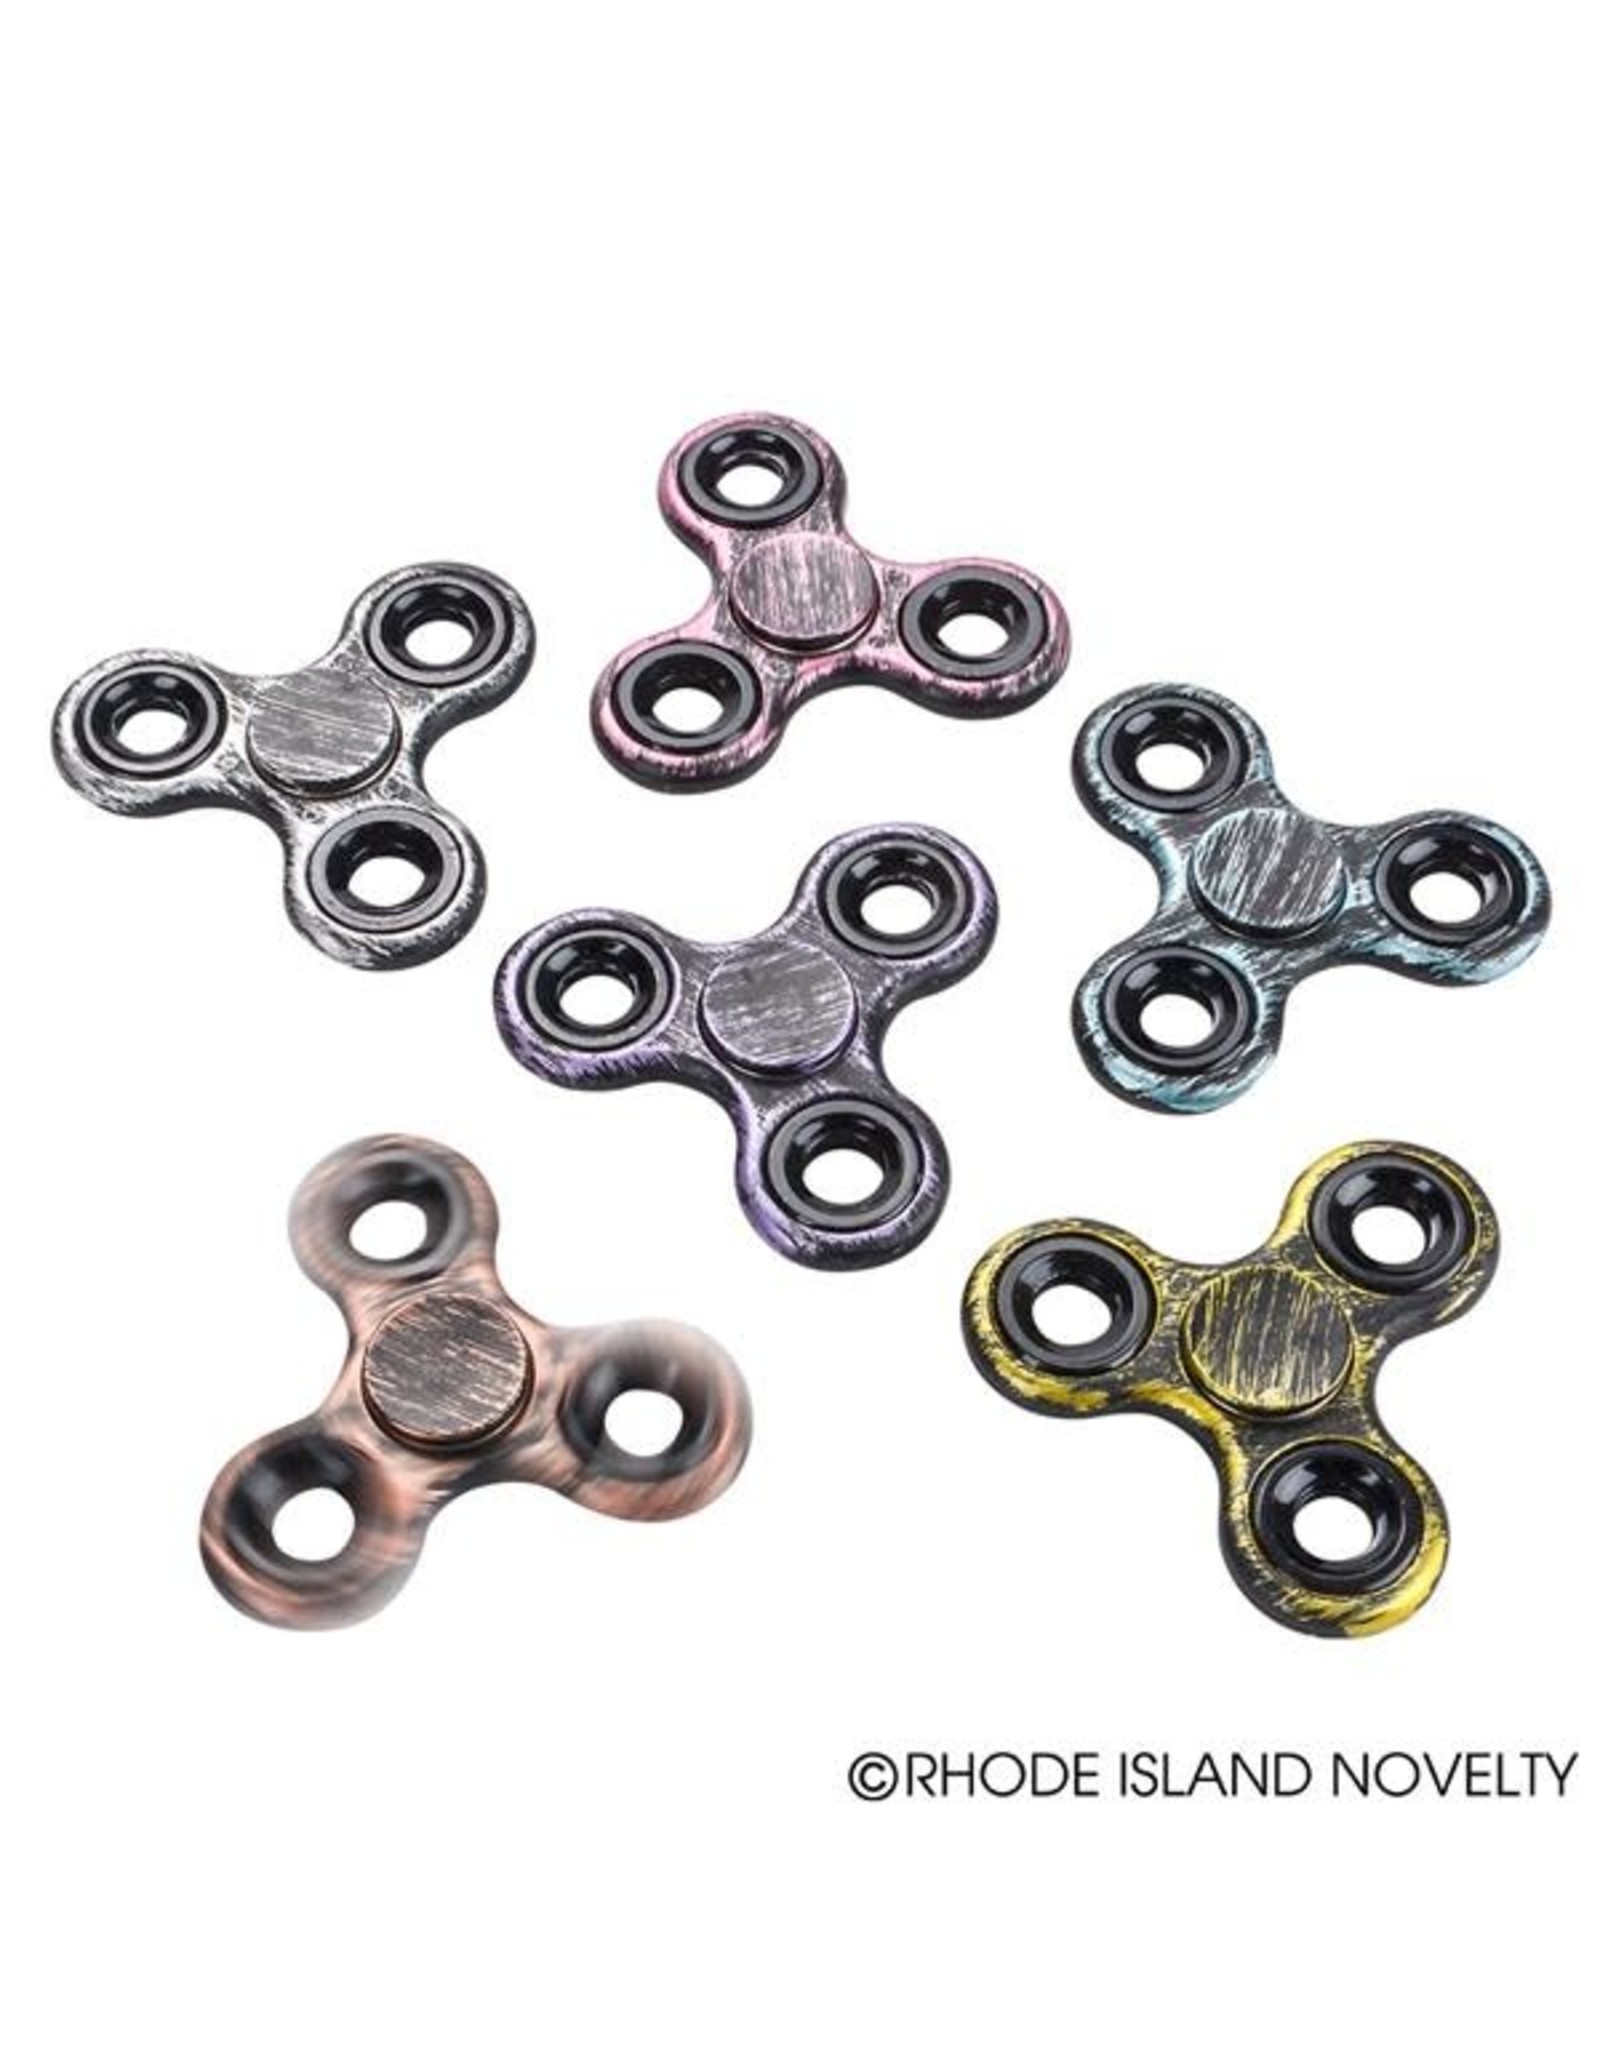 The Toy Network Distressed Look Fidget Spinner